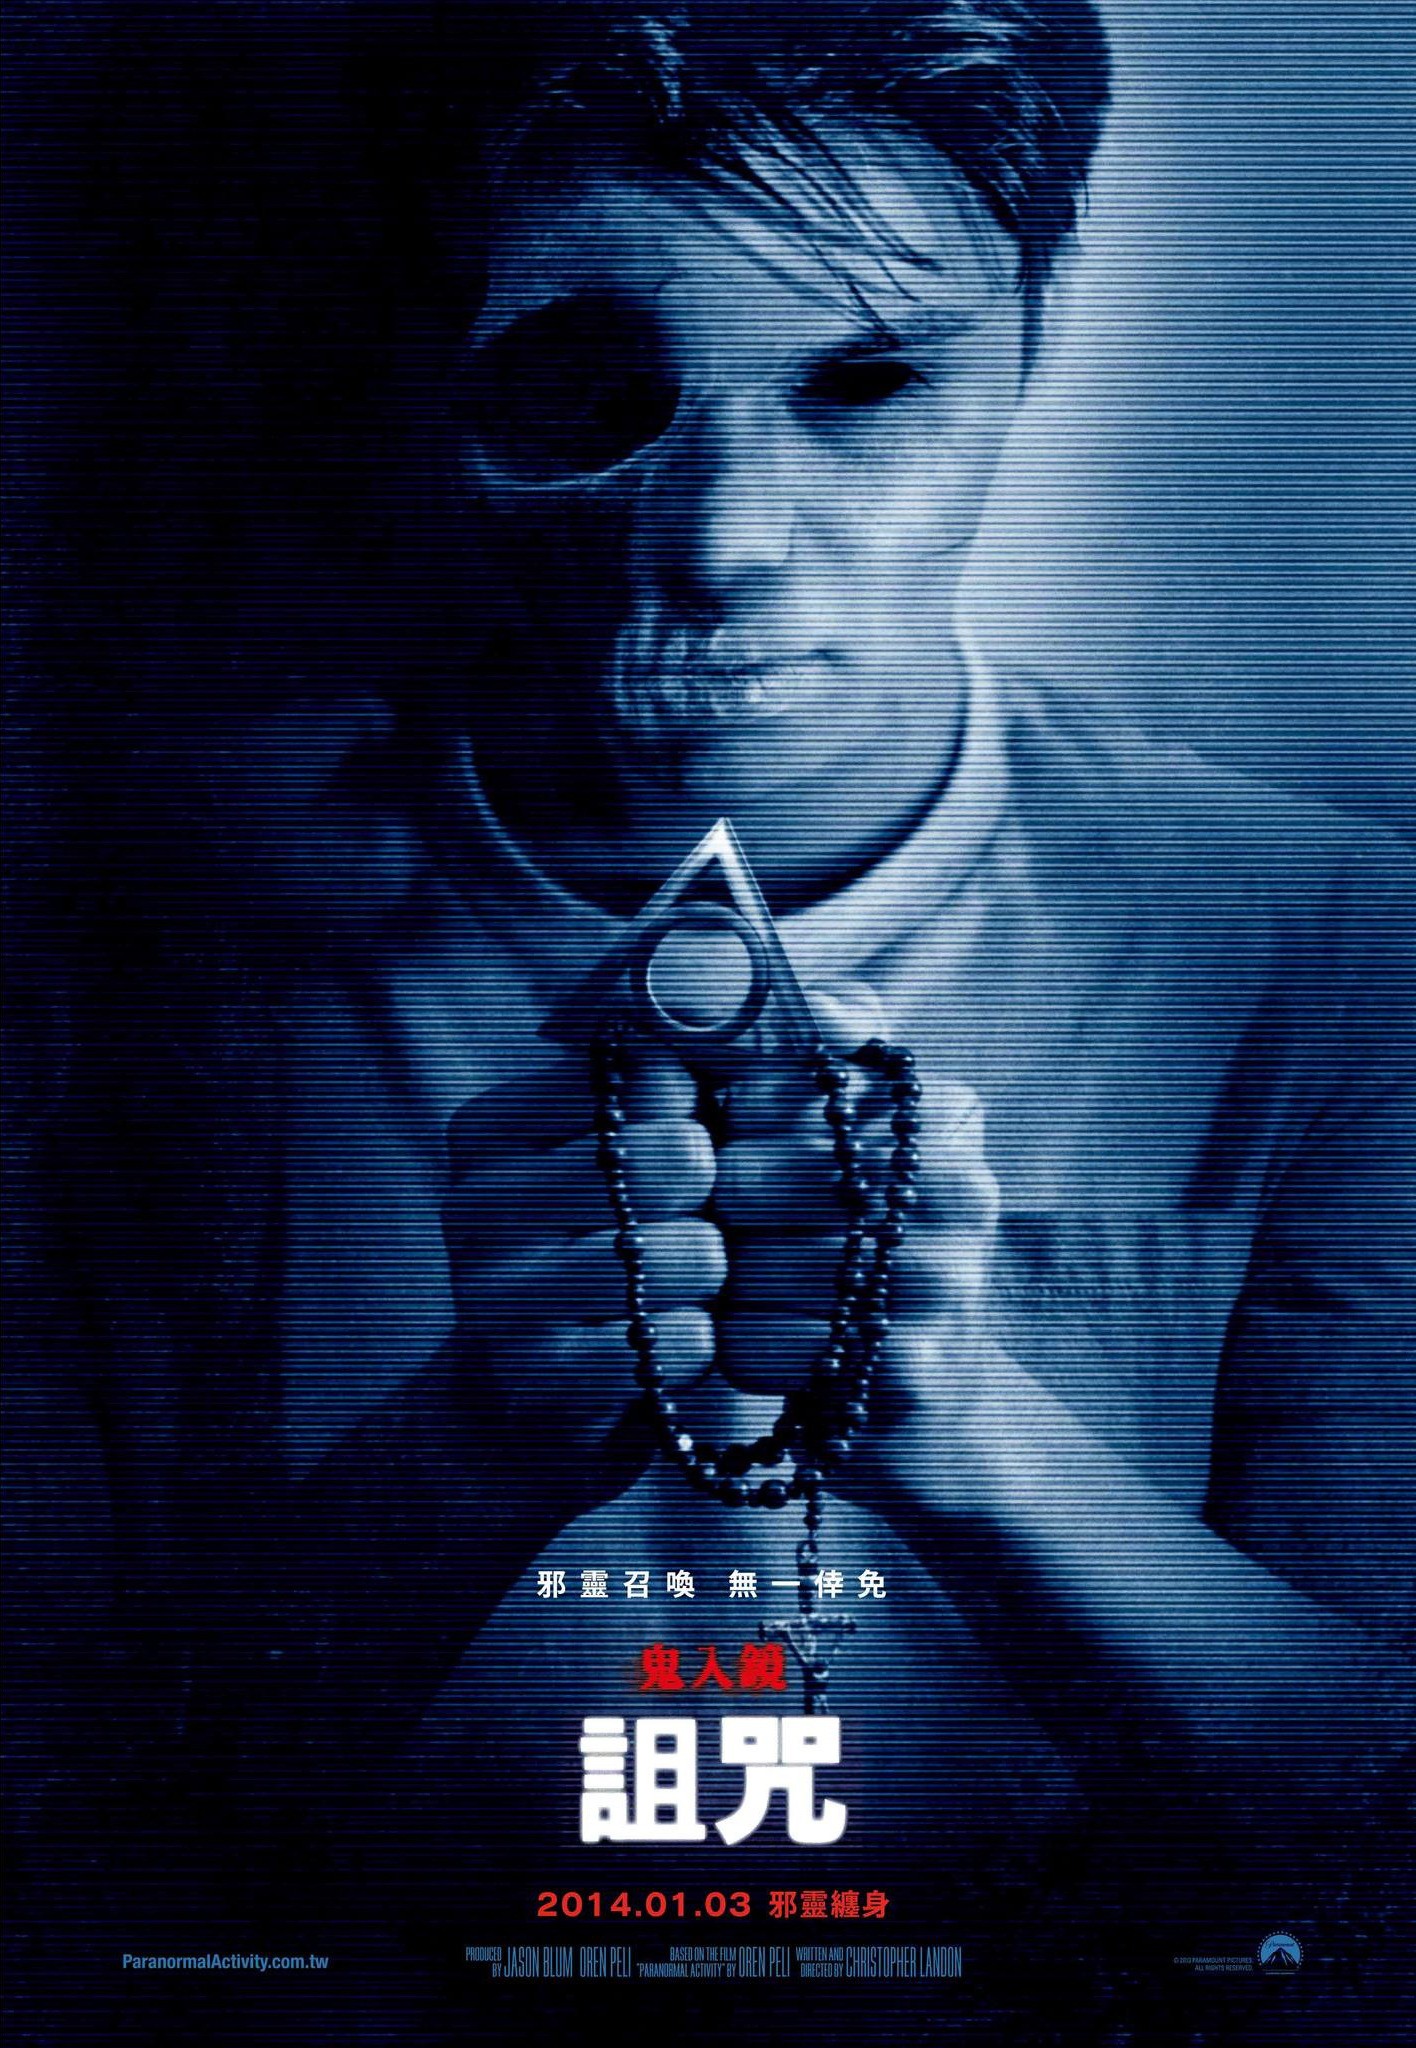 Paranormal Activity The Marked Ones-Official Poster Banner PROMO POSTER XXLG-04DEZEMBRO2013-01